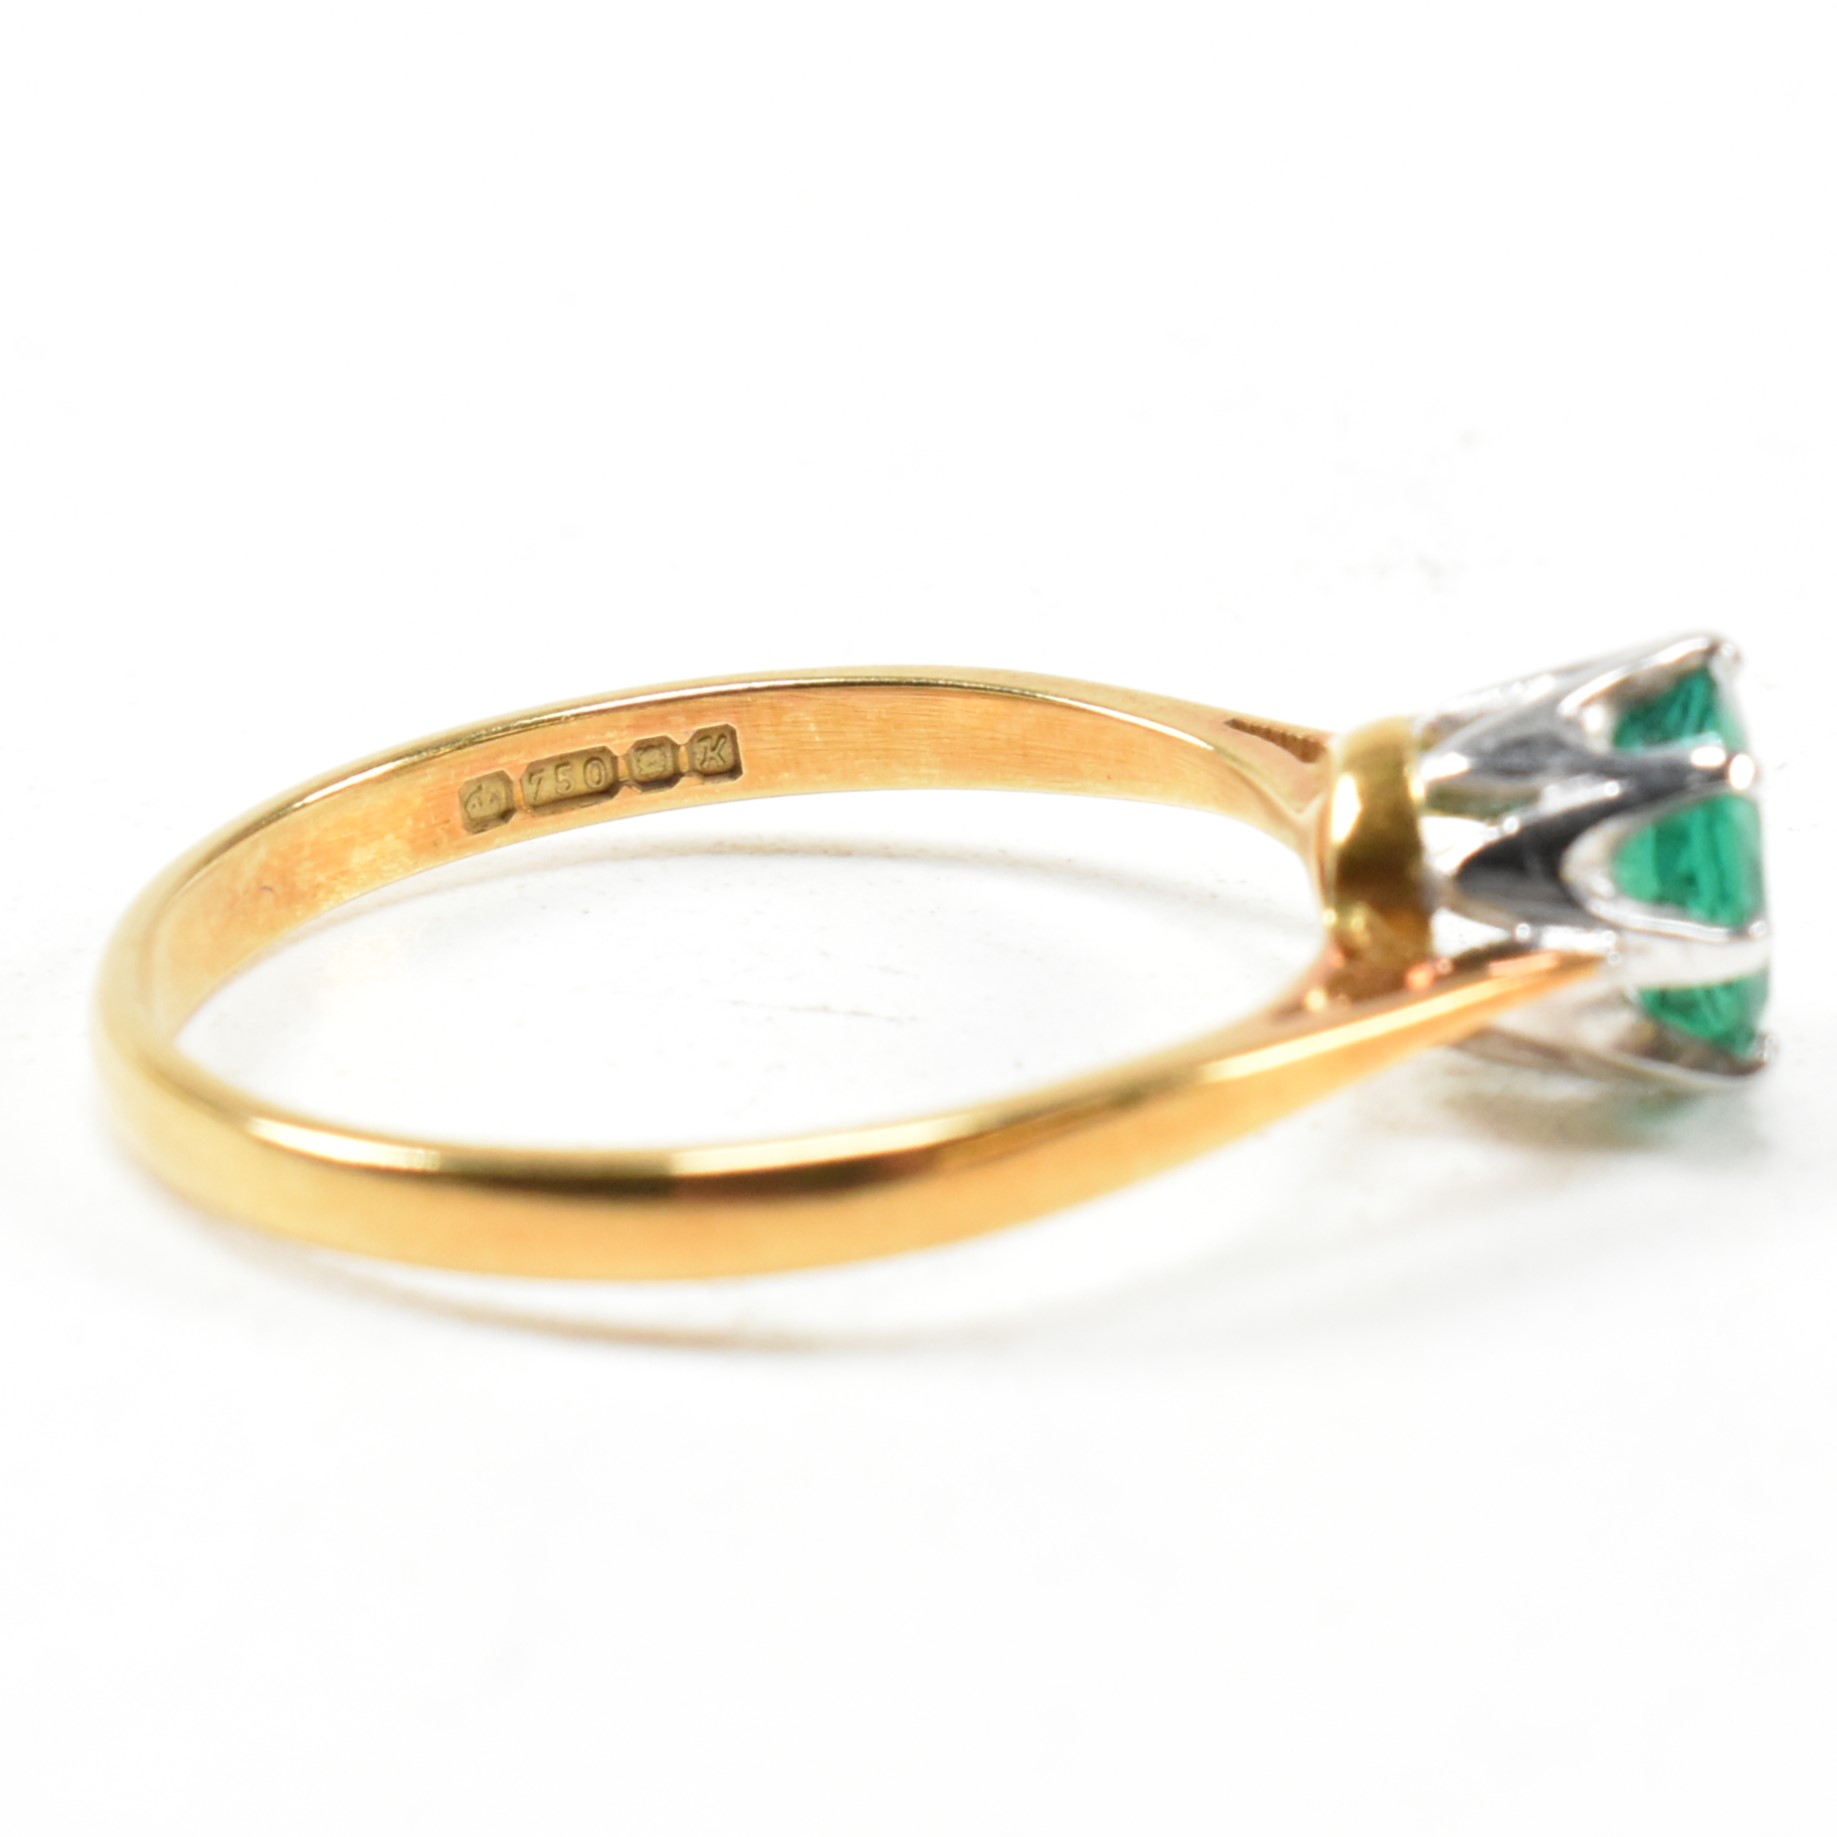 HALLMARKED 18CT GOLD & EMERALD SOLITAIRE RING - Image 5 of 10